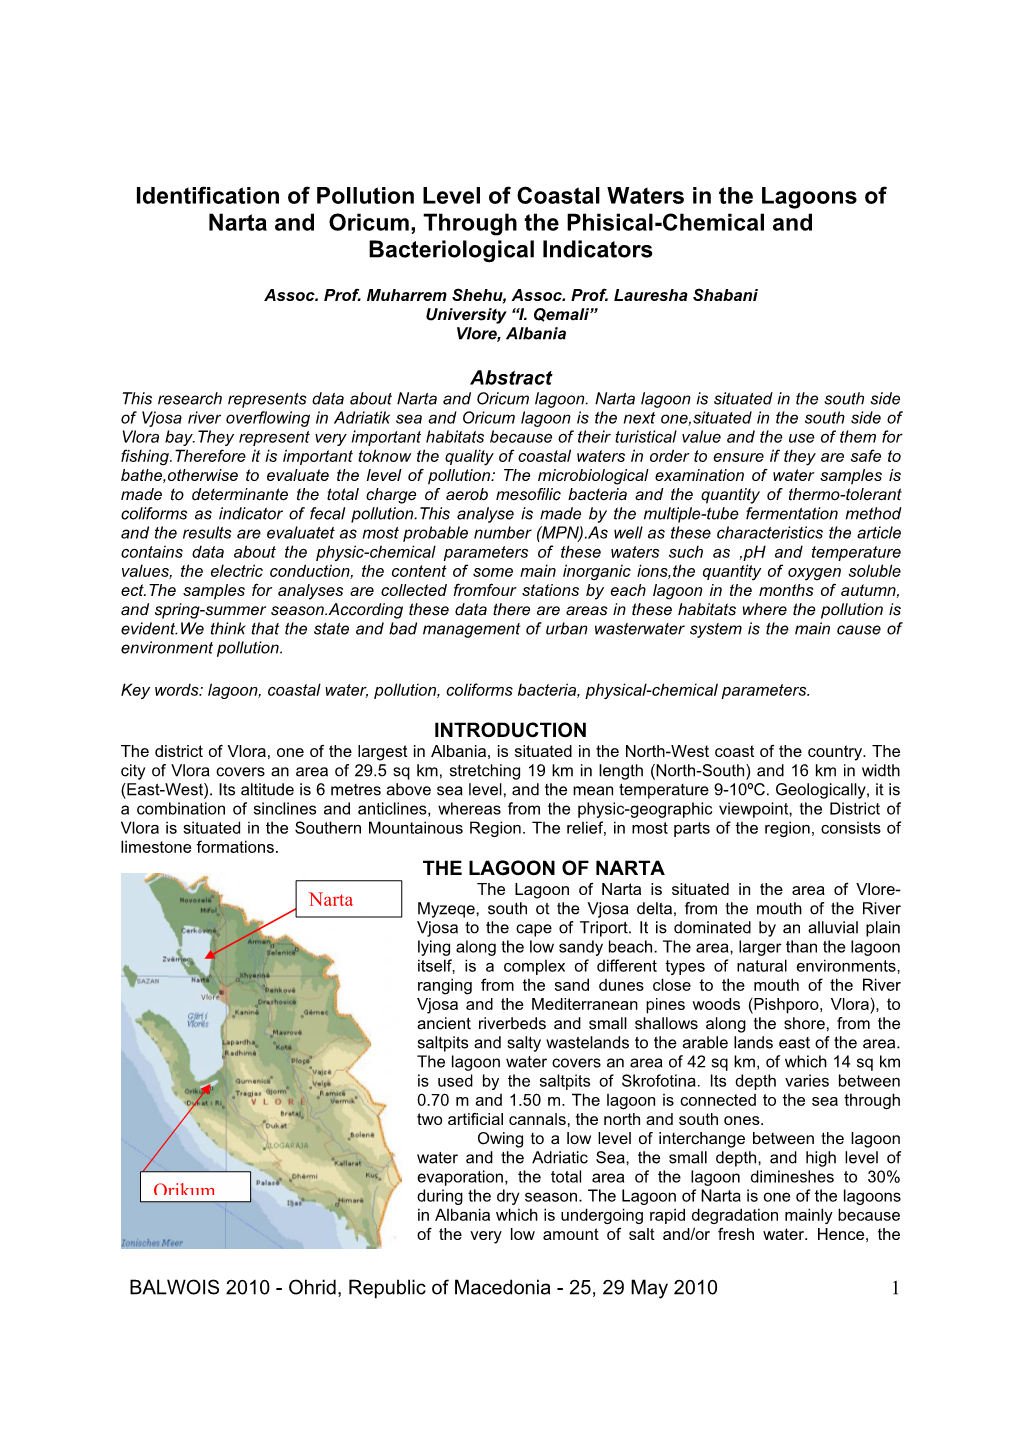 Identification of Pollution Level of Coastal Waters in the Lagoons of Narta and Oricum, Through the Phisical-Chemical and Bacteriological Indicators